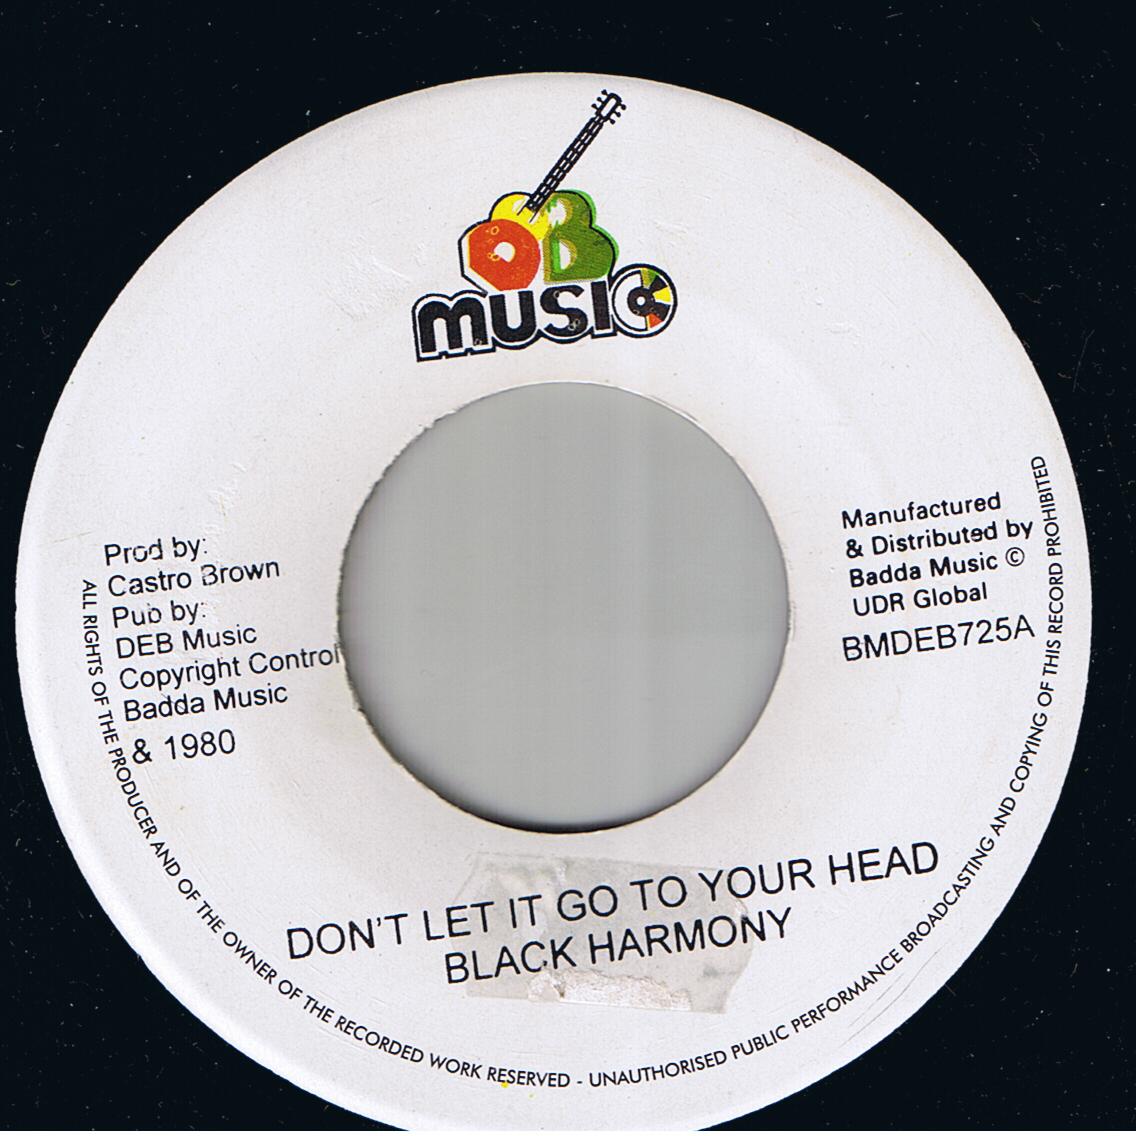 Black Harmony - Don't Let It Go To Your Head / DEB Players - Don't Let It Go To Your Brain (7")